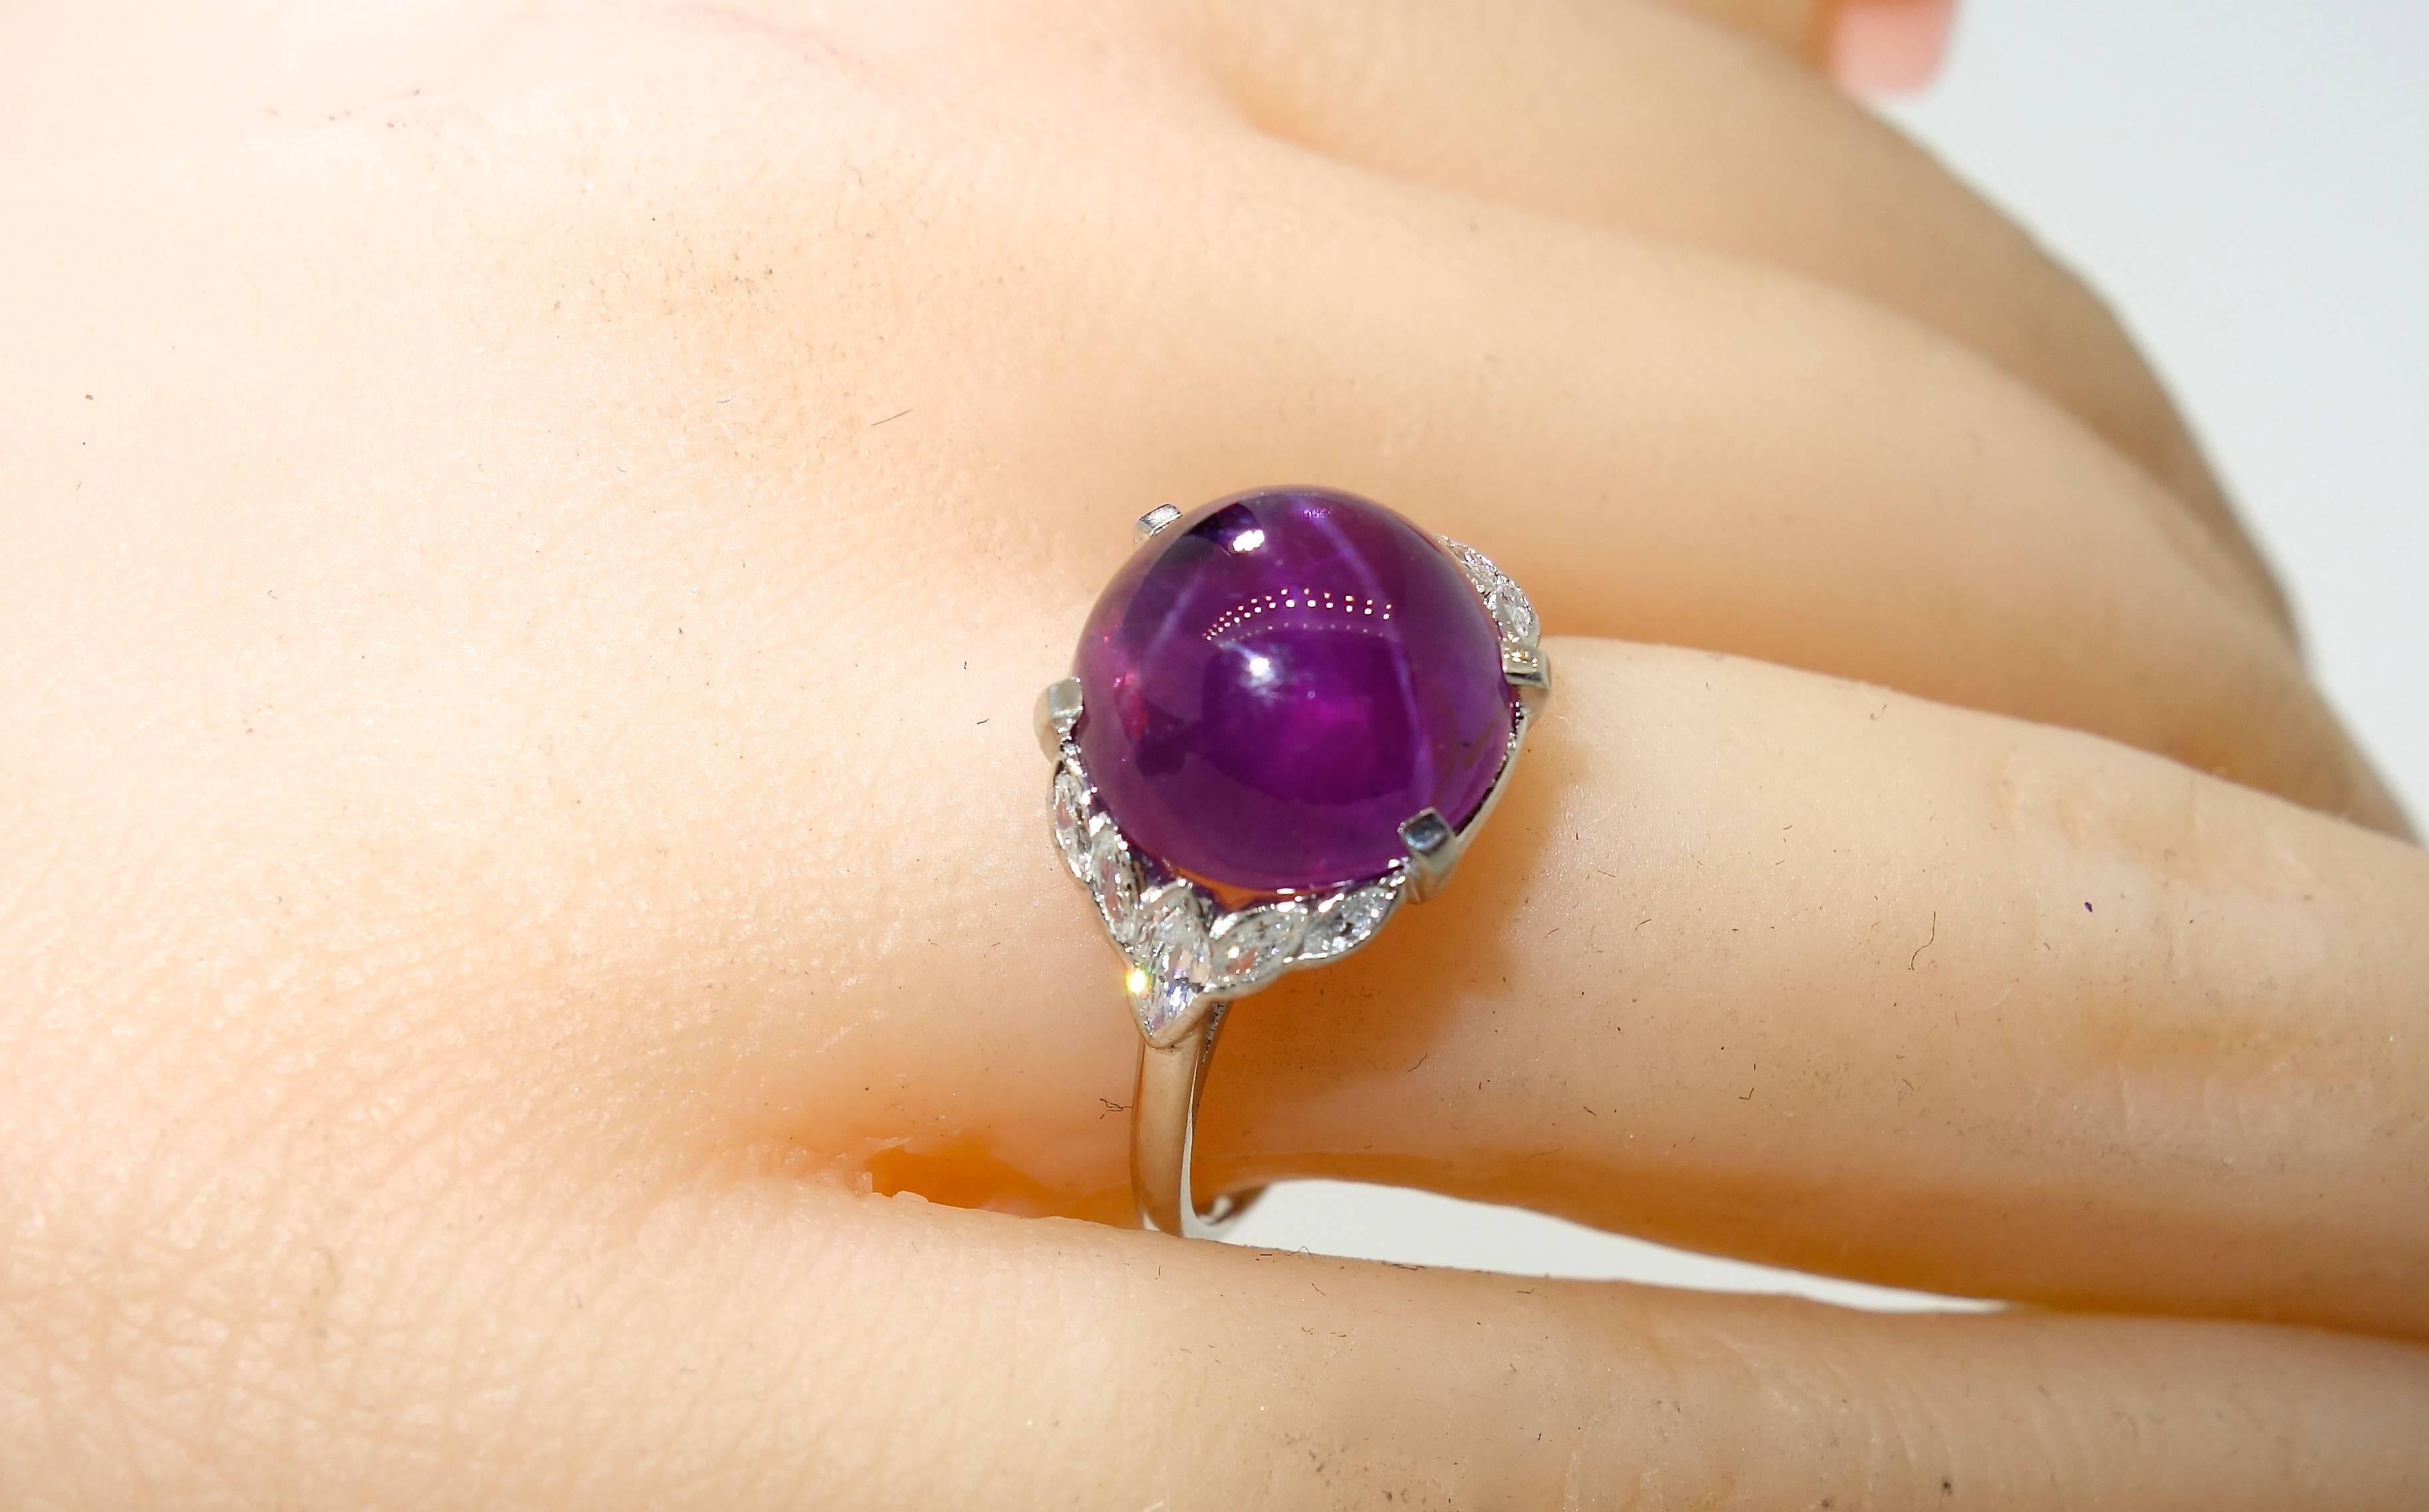 The fine center stone is an unusual natural star sapphire weighing 6.6 cts. in a delicate early 20th century platinum and diamond ring by the famous jewelry house Birks.  There are 10 marquis cut diamonds all near colorless (G/H) and very slightly